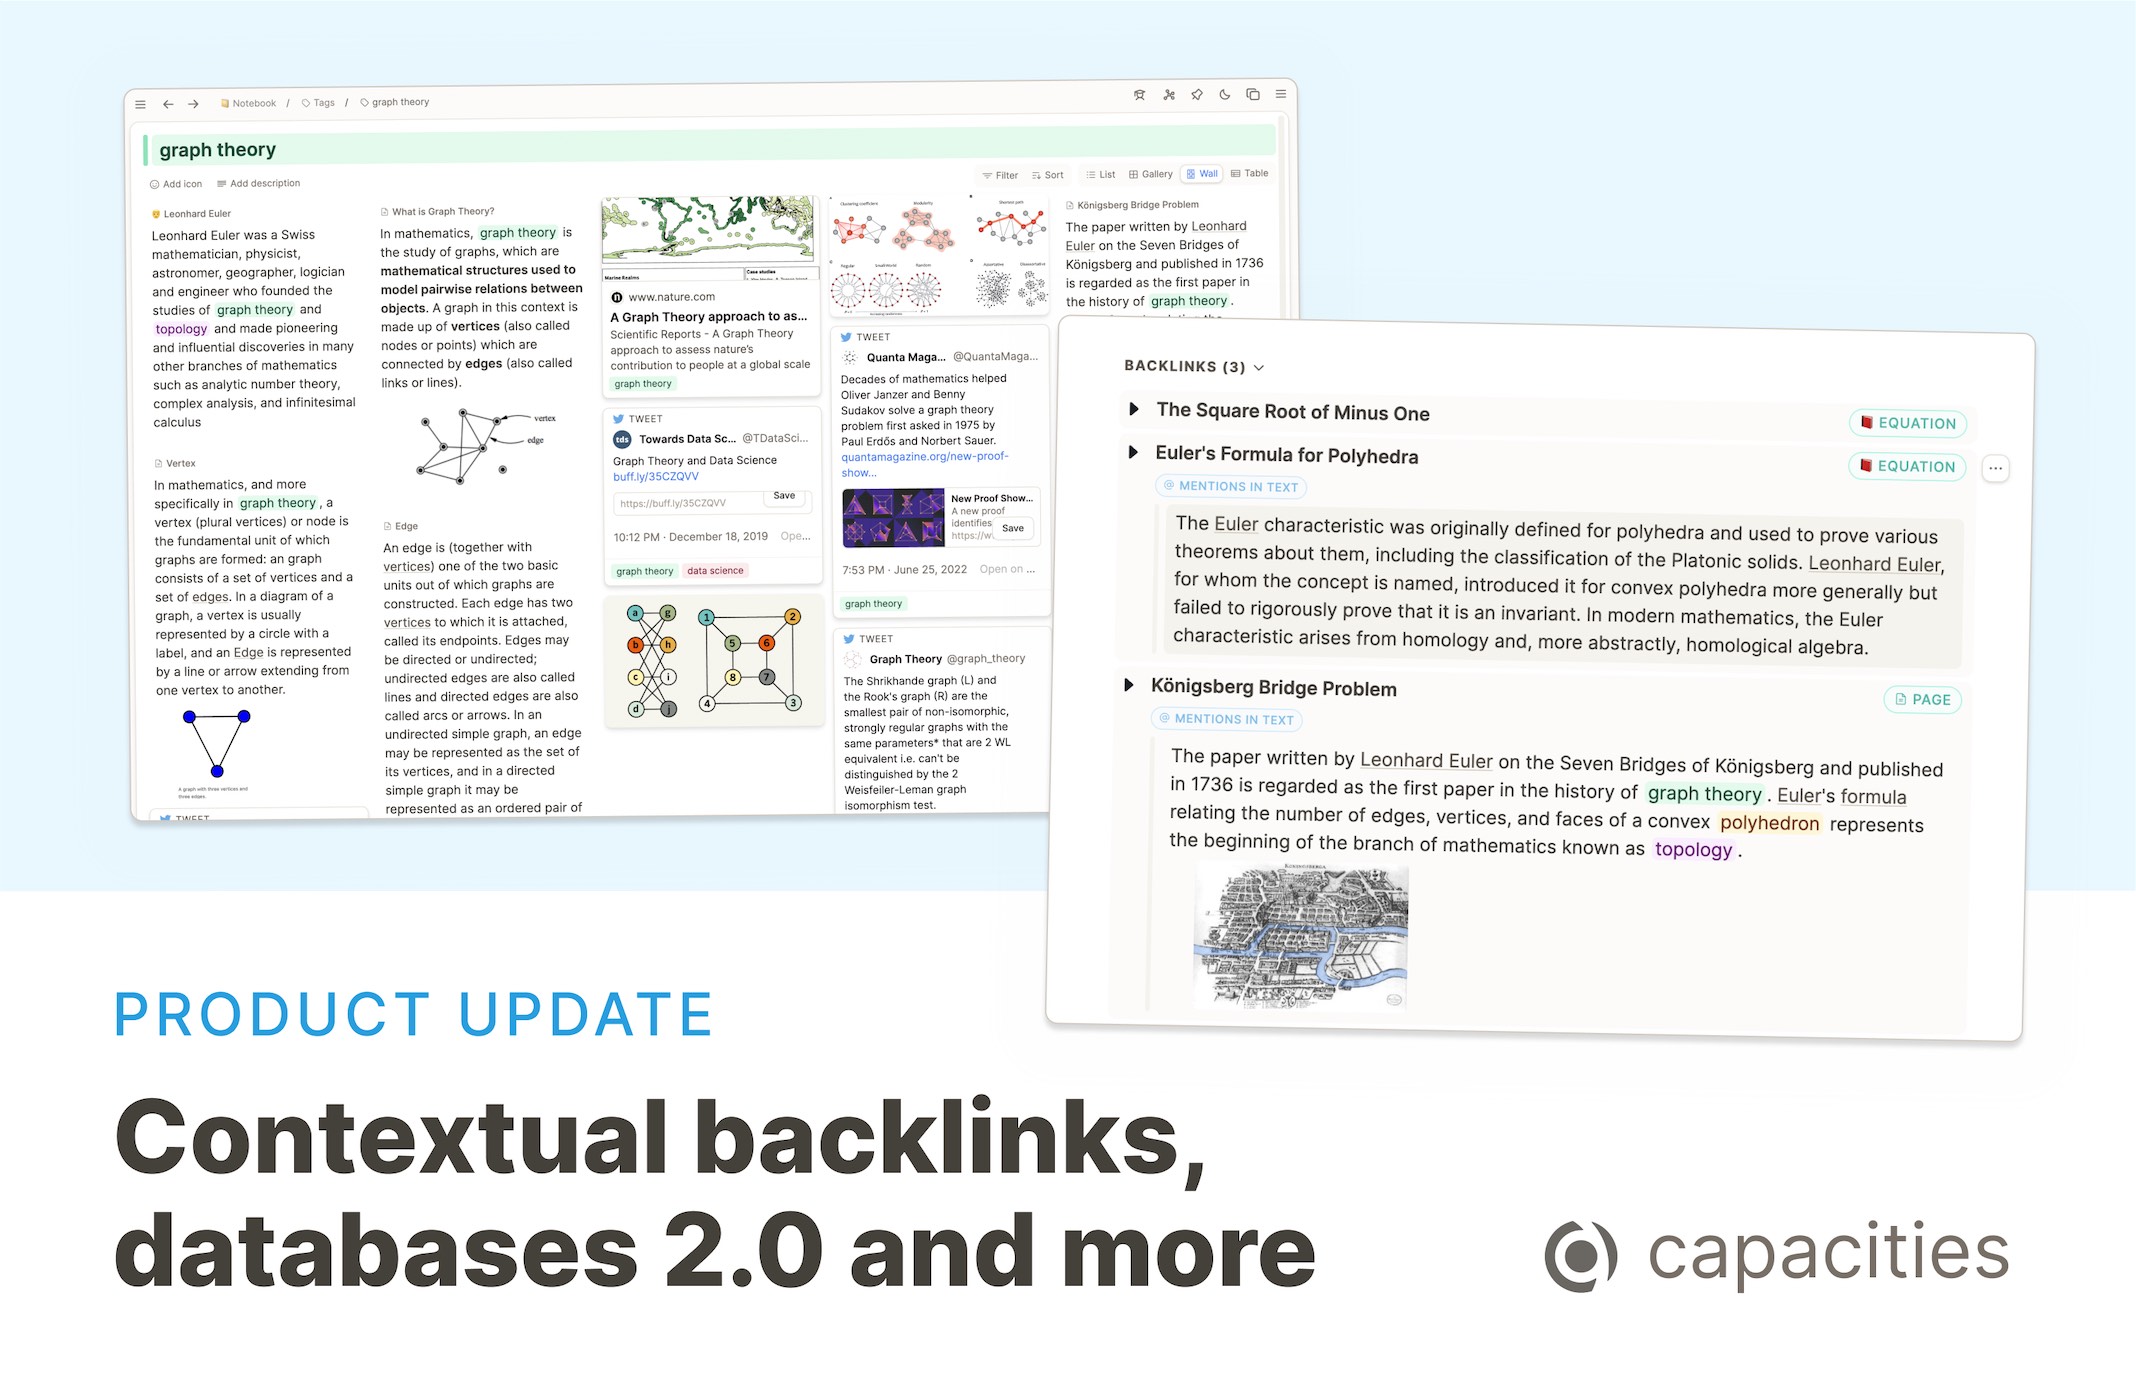 Contextual backlinks, databases 2.0 and more